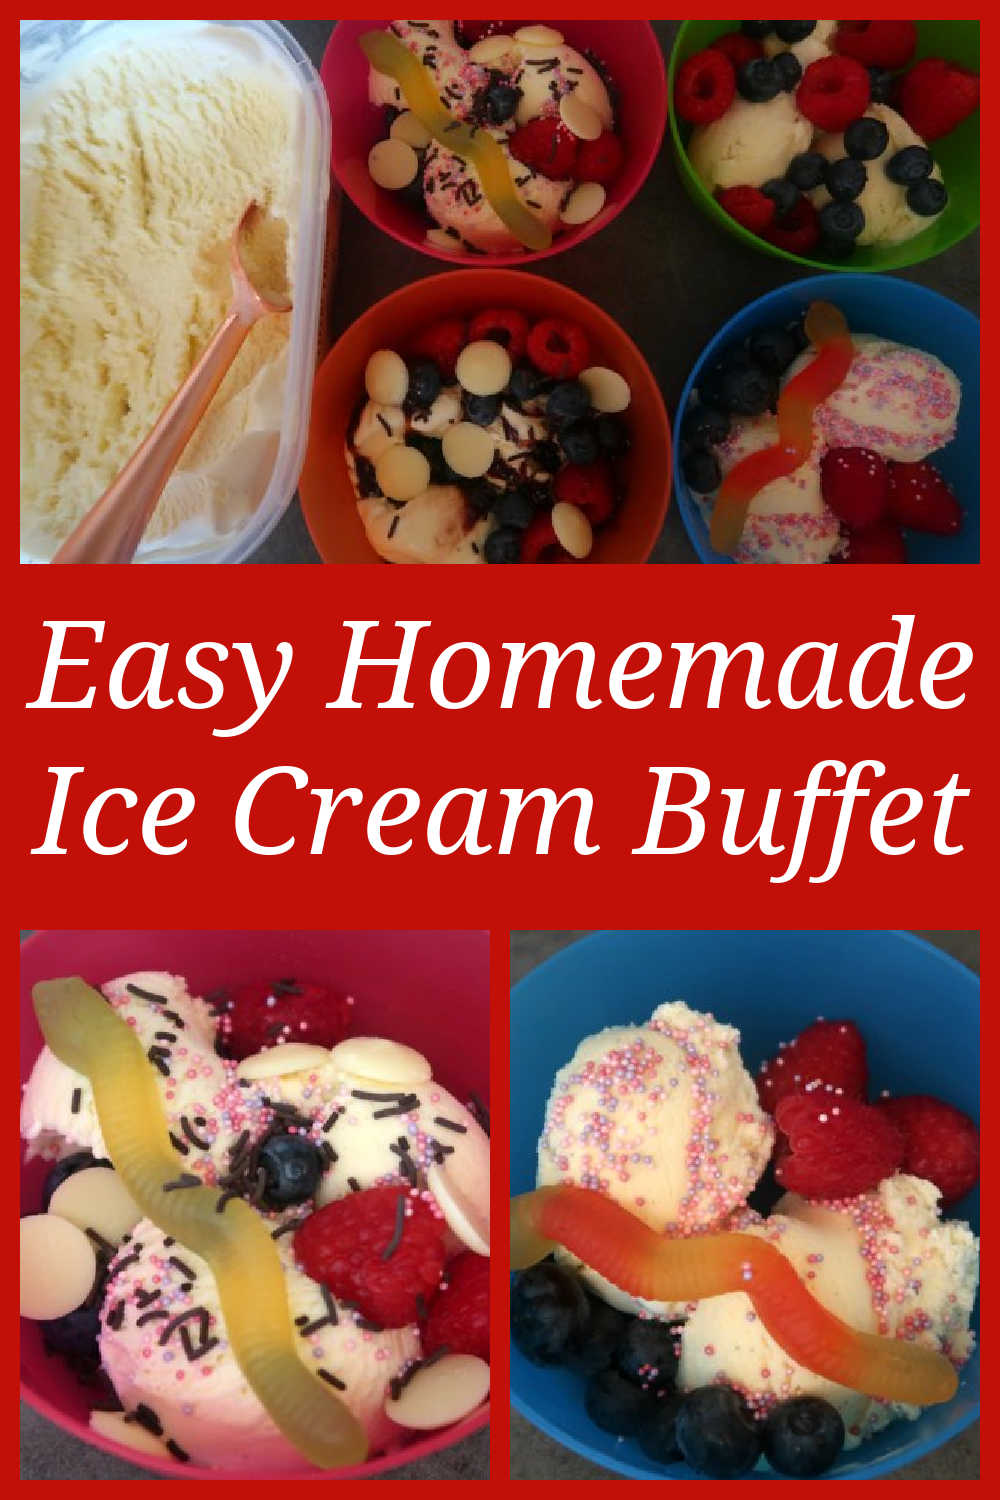 DIY Ice Cream Bar Ideas - How to prepare a quick and easy ice cream sundae buffet table for a kids or adults party with loads of toppings ideas.